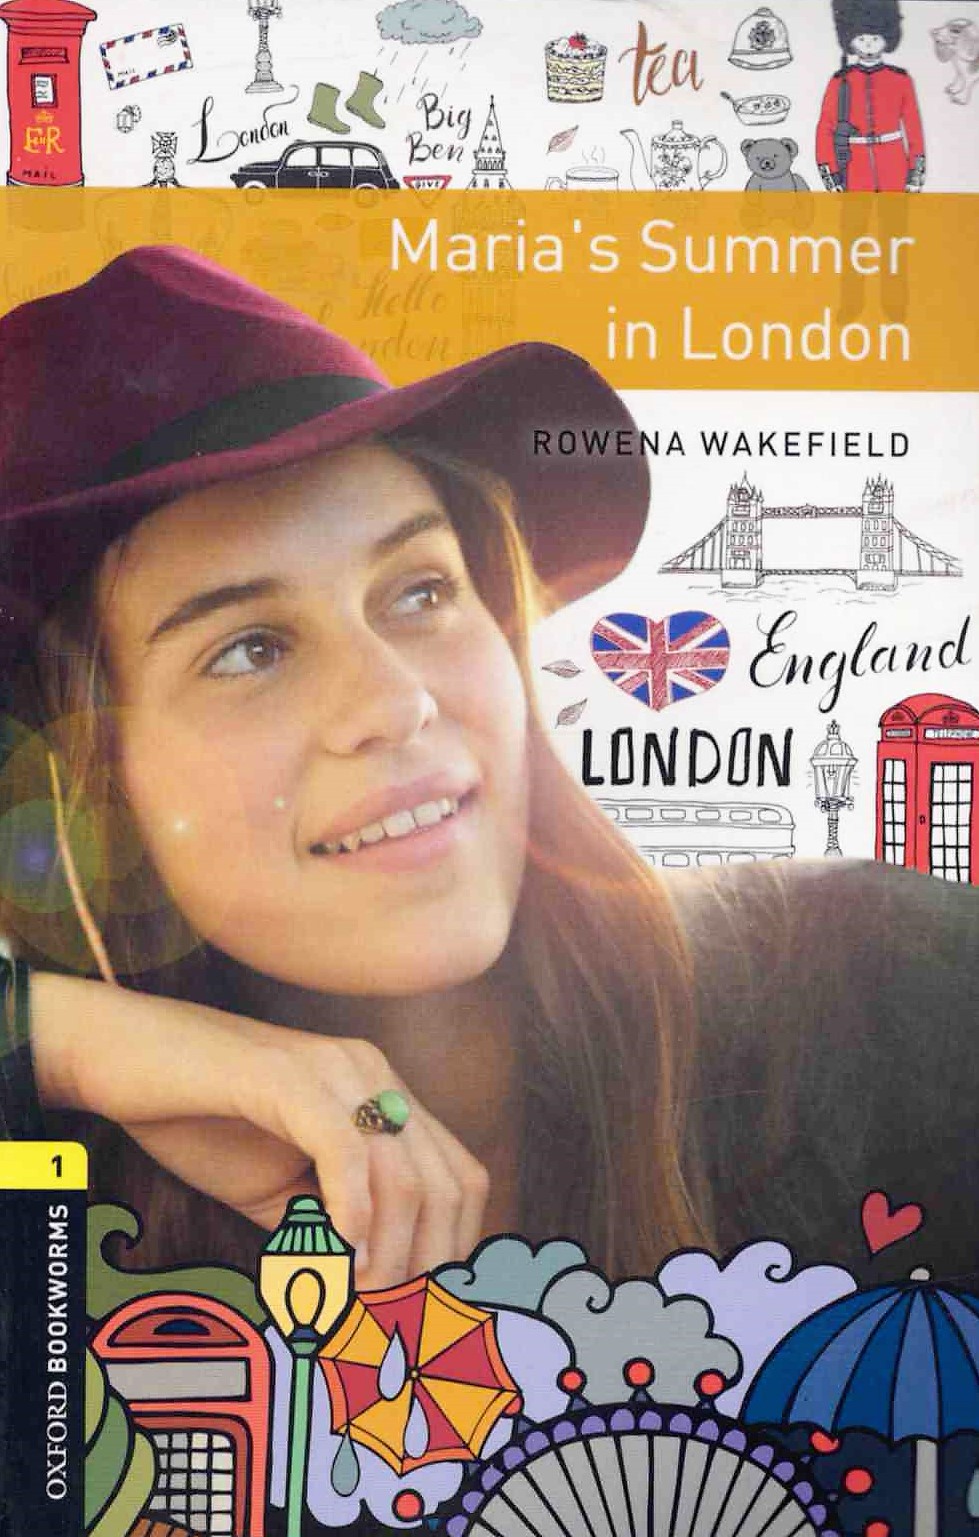 Maria's Summer in London